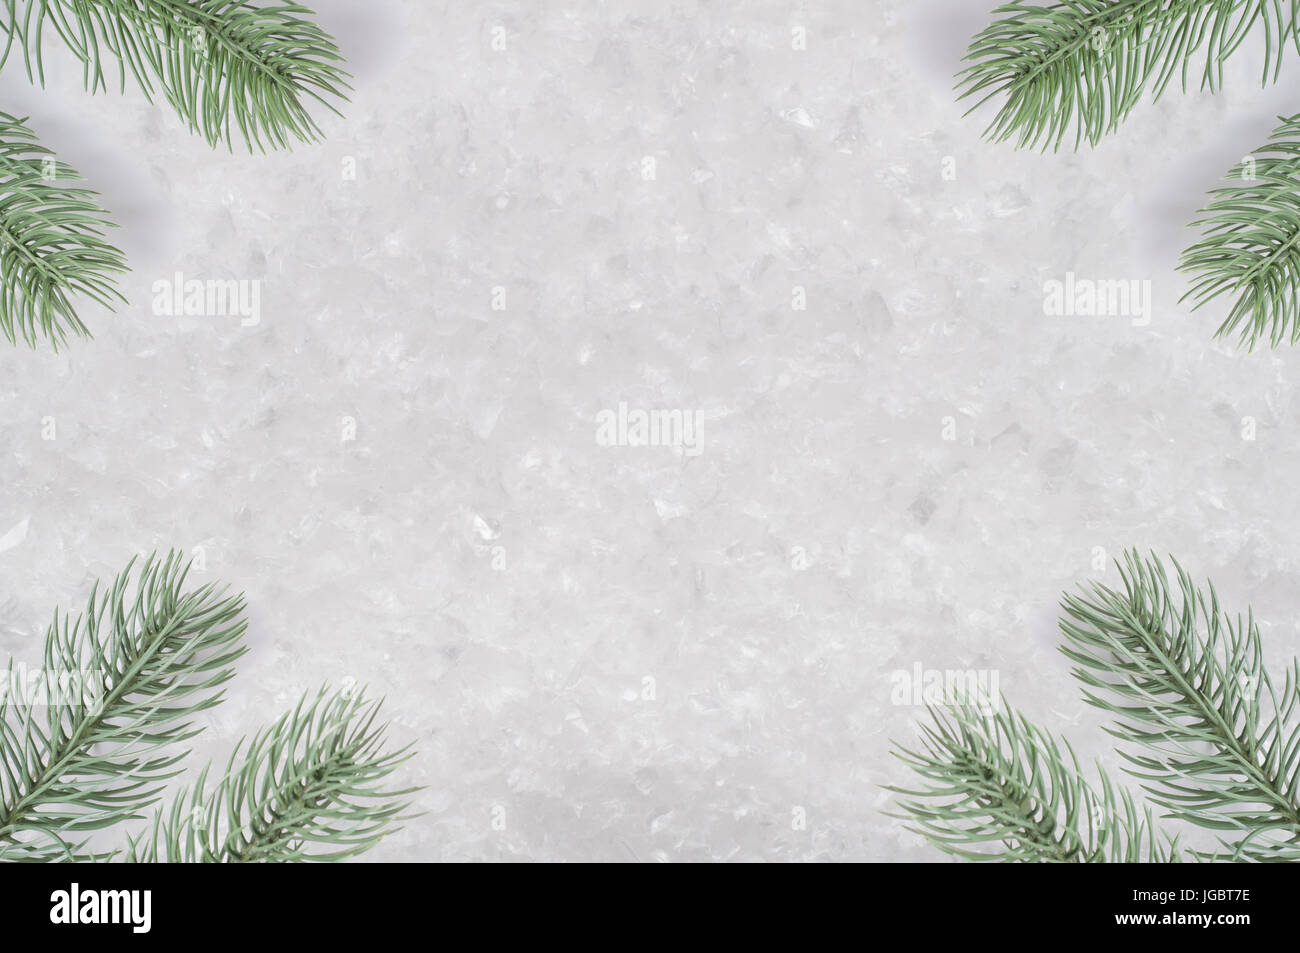 A background texture of artifical snow with ice fragments, framed by Christmas tree branches positioned in the corners. Stock Photo